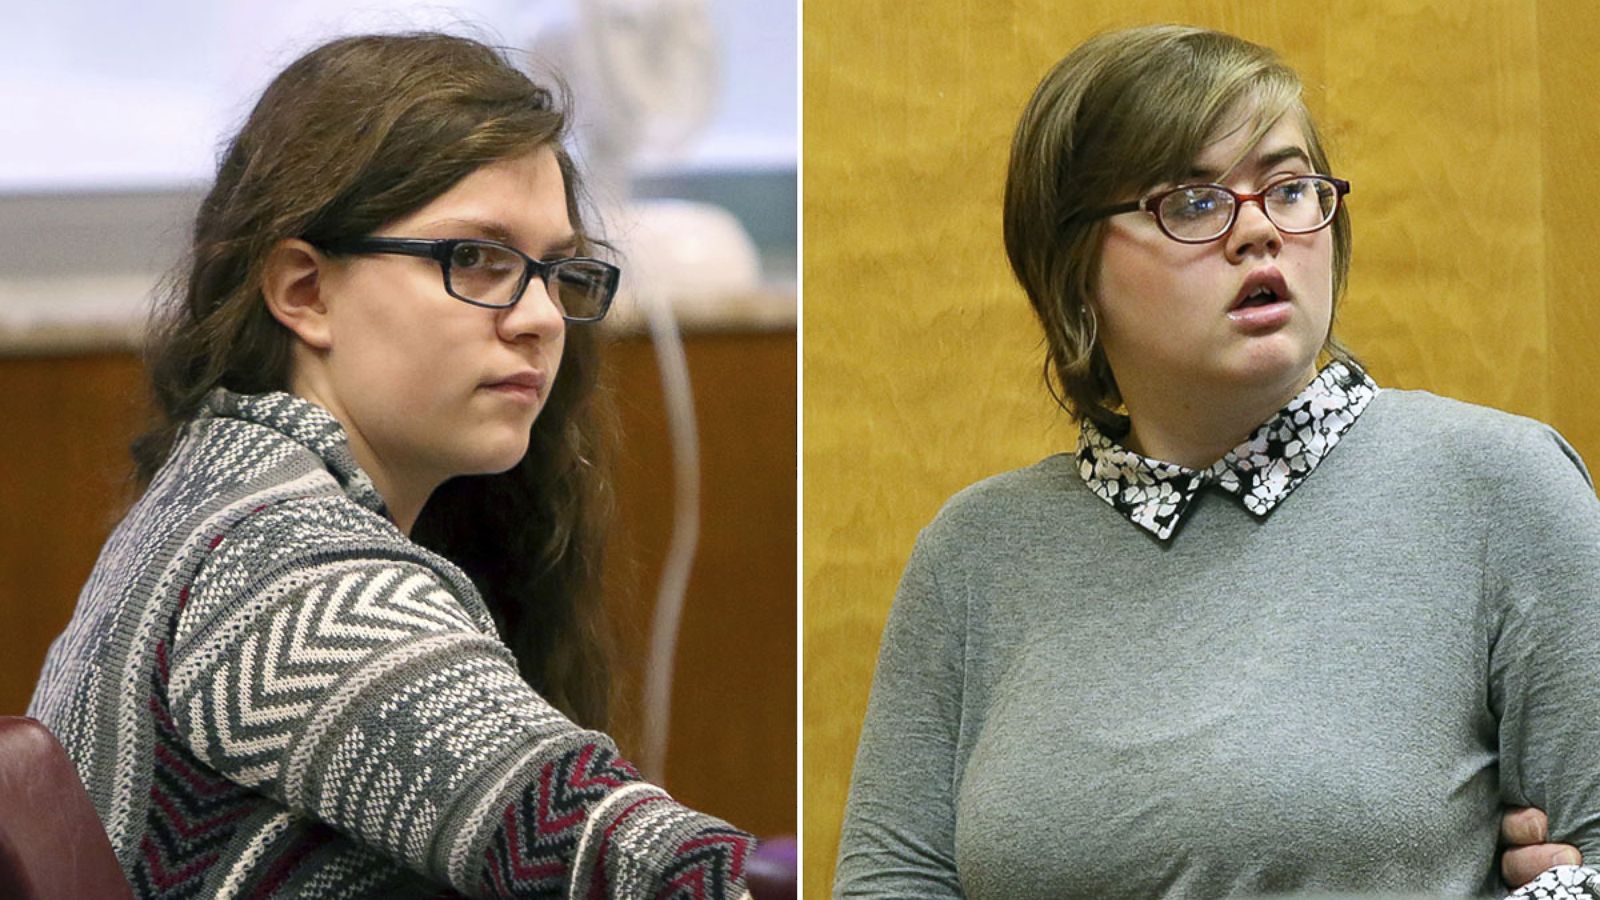 Mothers Of Teens Who Pleaded Guilty In Slender Man Stabbing Case Say There Were No Warning Signs Of Violence Abc News - slender man song roblox id